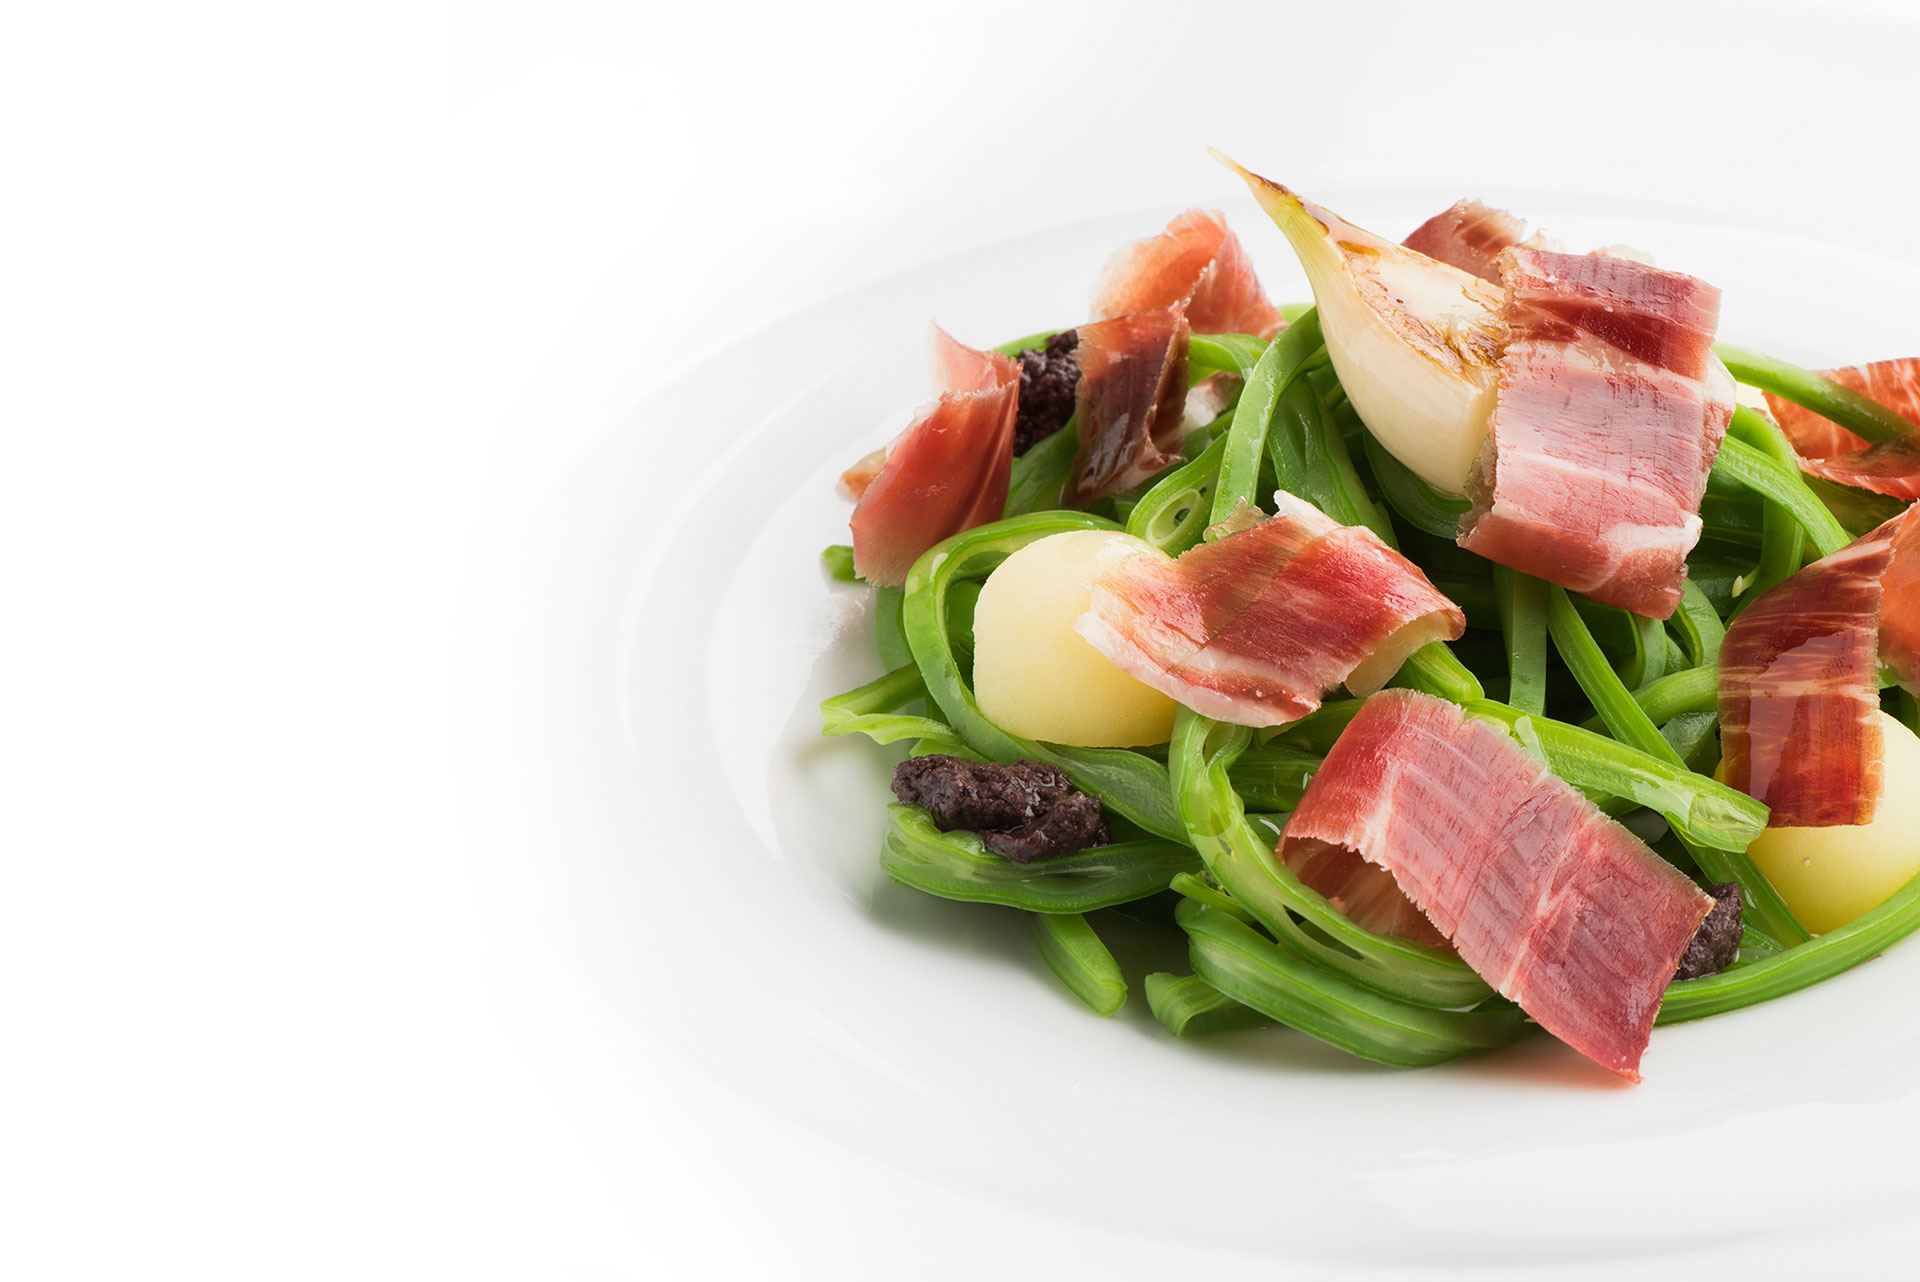 Sauteed beans with slices of Ham